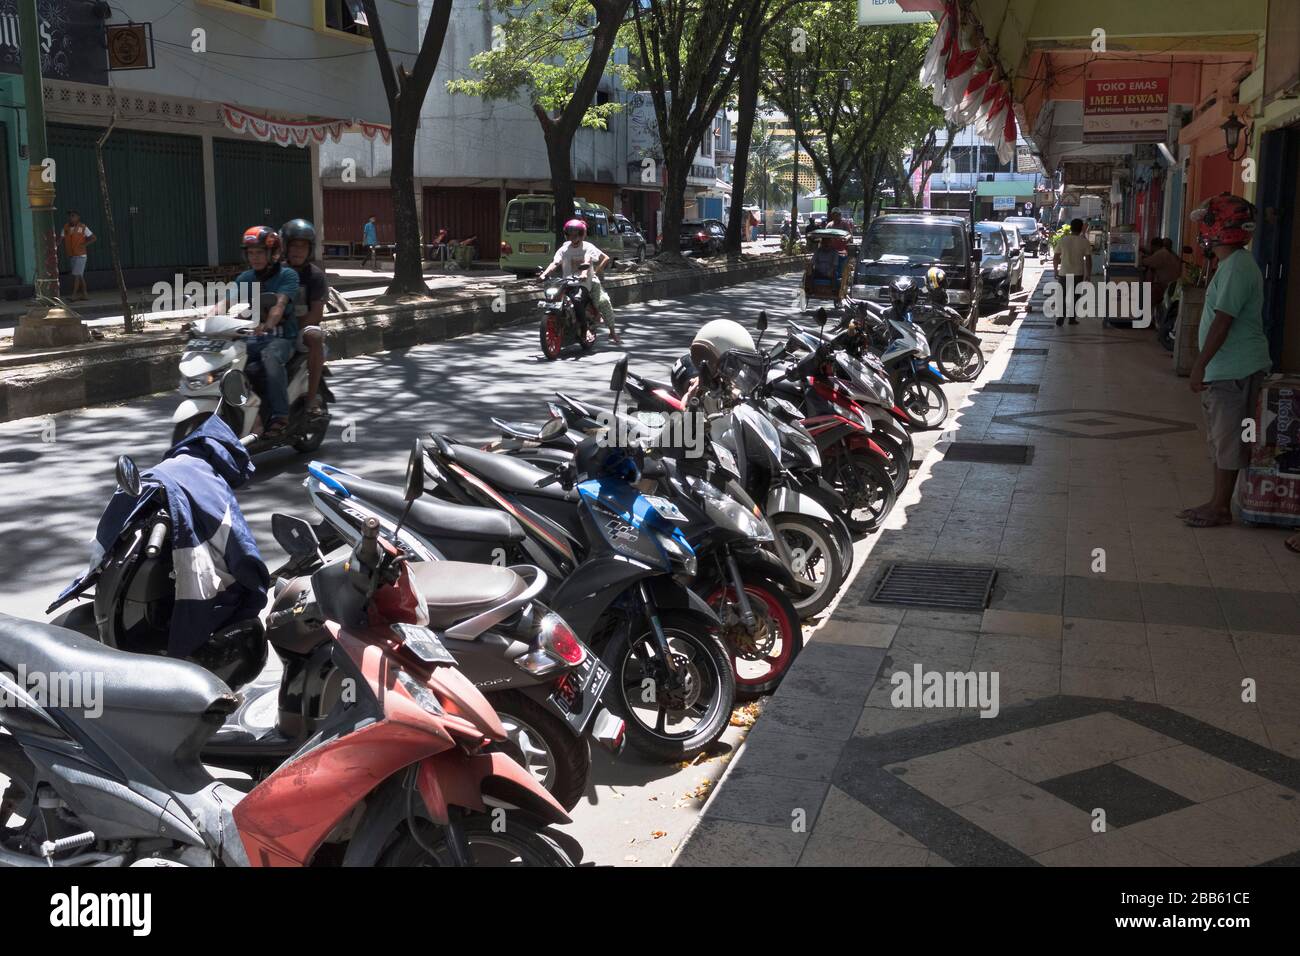 dh Asian Motor bikes city street AMBON MALUKU INDONESIA Row of parked transport asian motorbikes motorcycles cityscooters south east asia motorbike Stock Photo